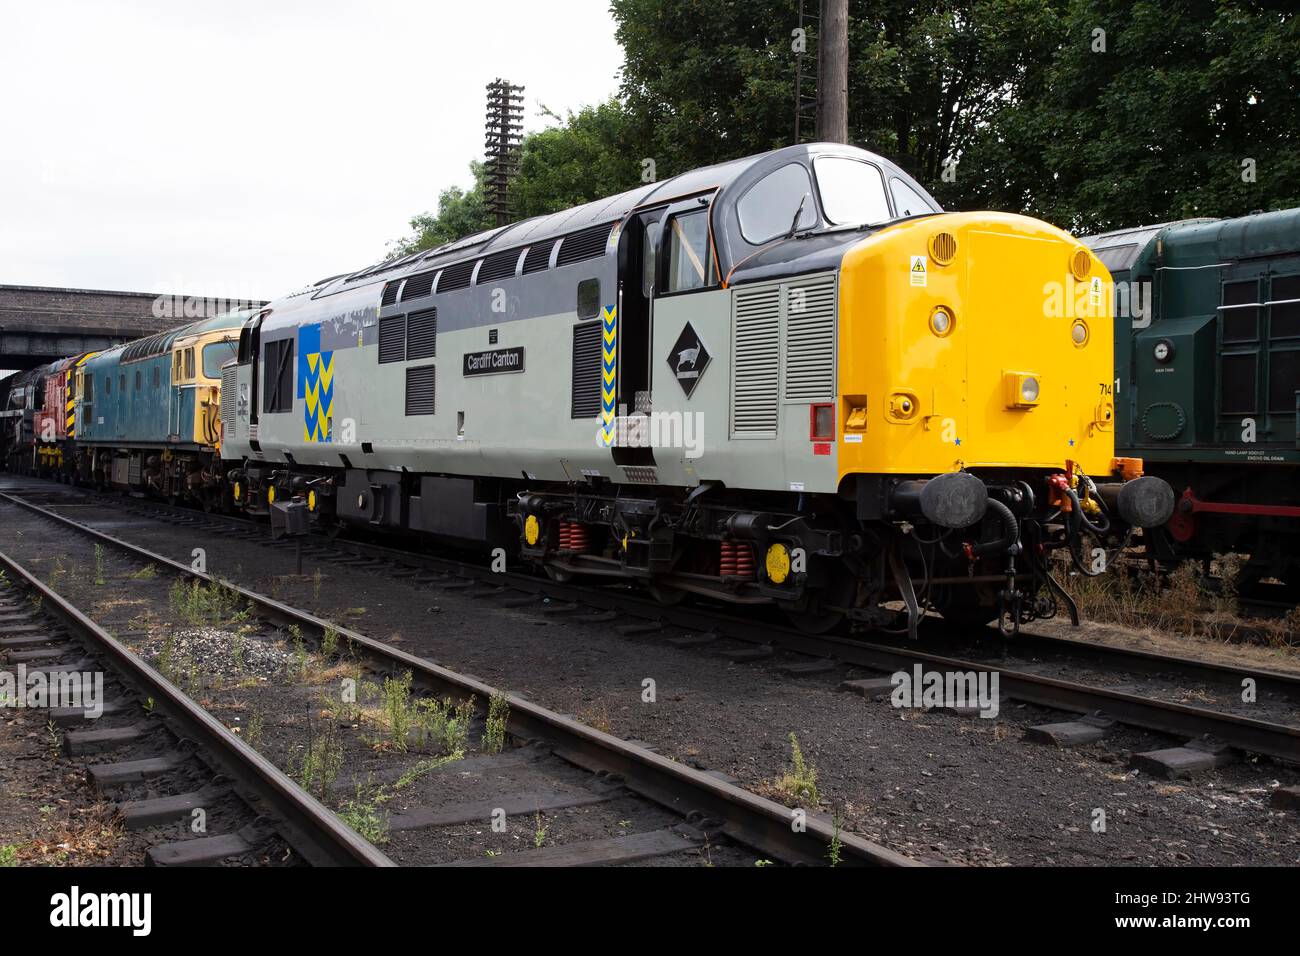 British Rail Class 37 diesel-electric locomotive 37714 'Cardiff Canton' repainted in a new livery in the sidings at Loughborough Great Central Railway Stock Photo